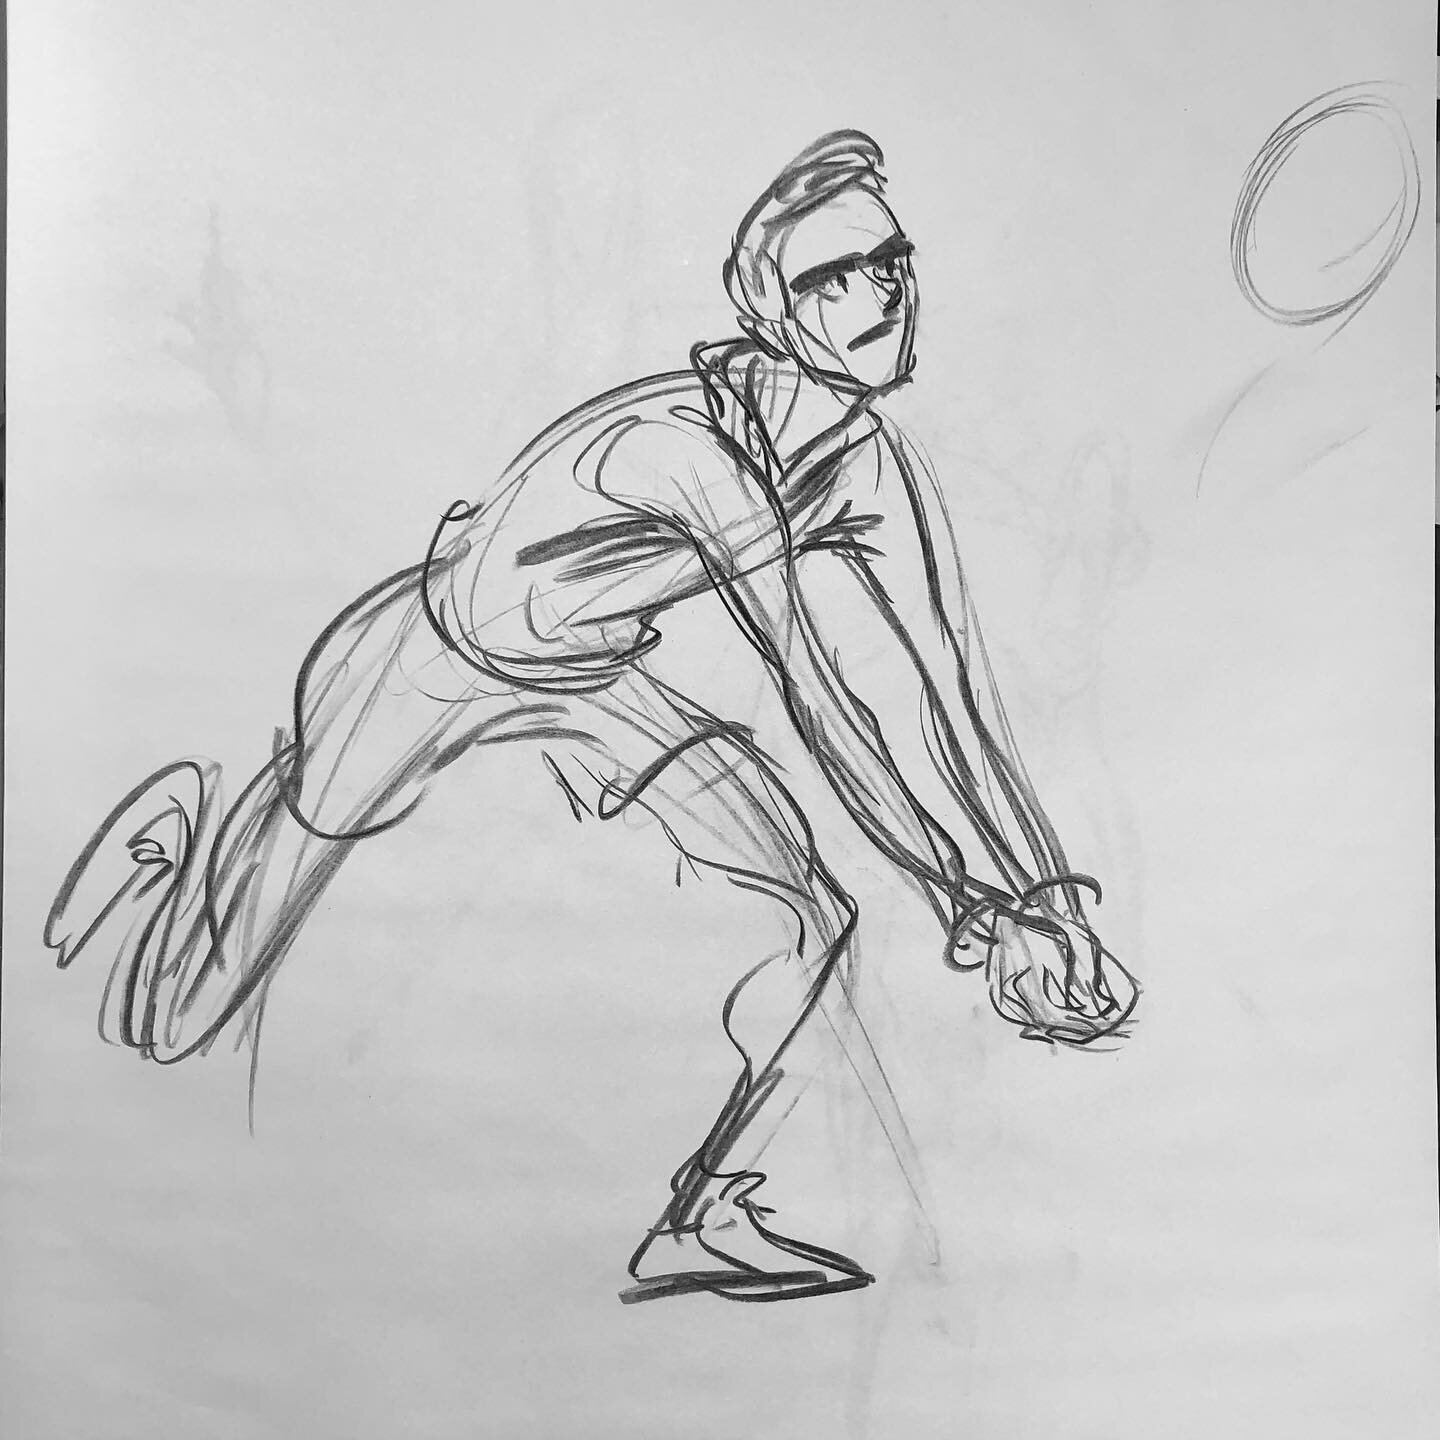 🏐Volleyball theme today at All In Gesture. @jonathan.gardon gave us a great character! #gesturedrawing #sketch #volleyball #volleyballlife #draw #animation #charcoaldrawing